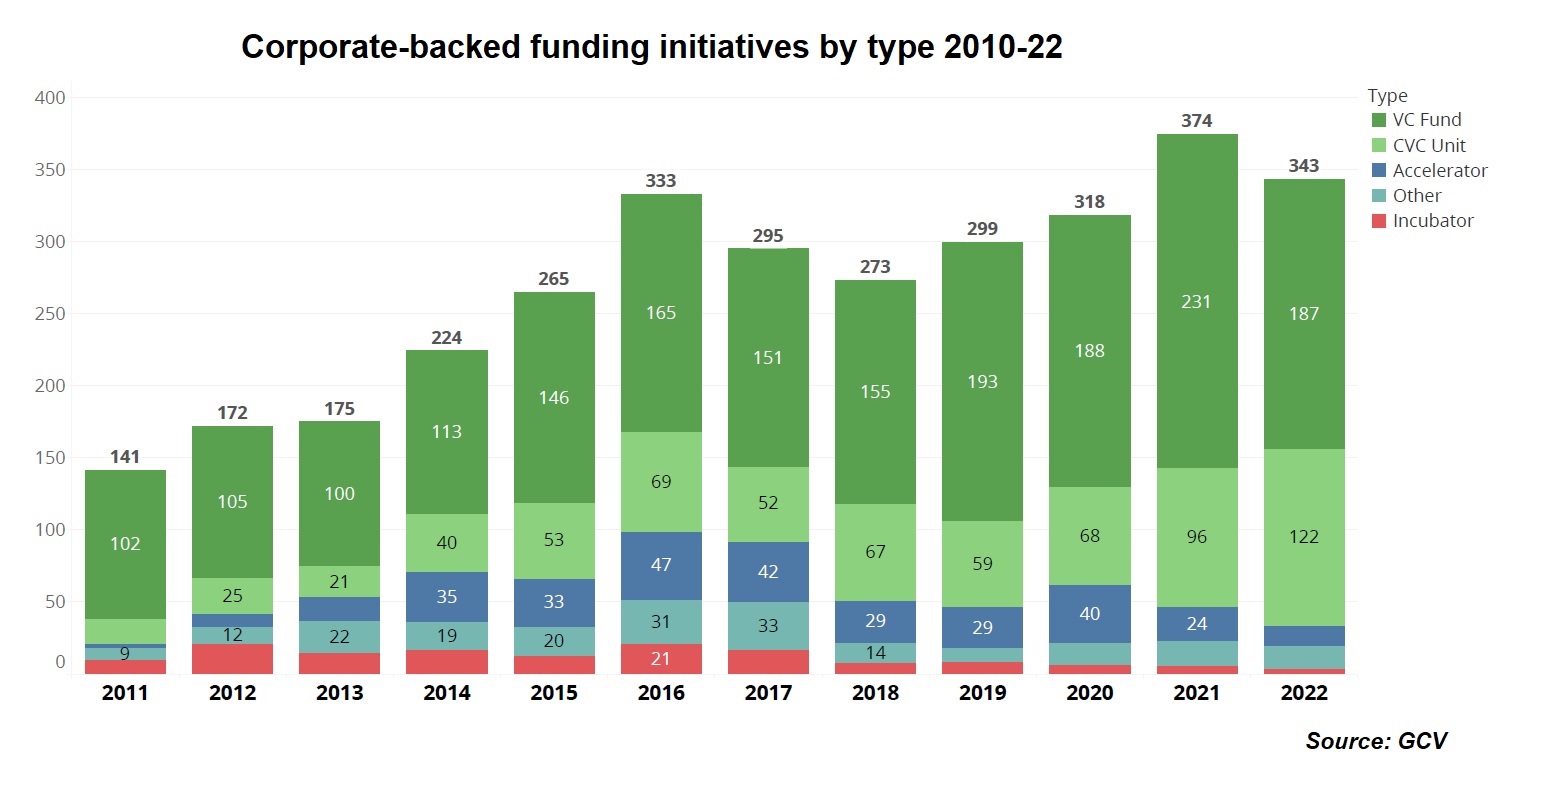 Historical stacked bar chart of corporate-backed funding initiatives by type 2010-22. Source: GCV